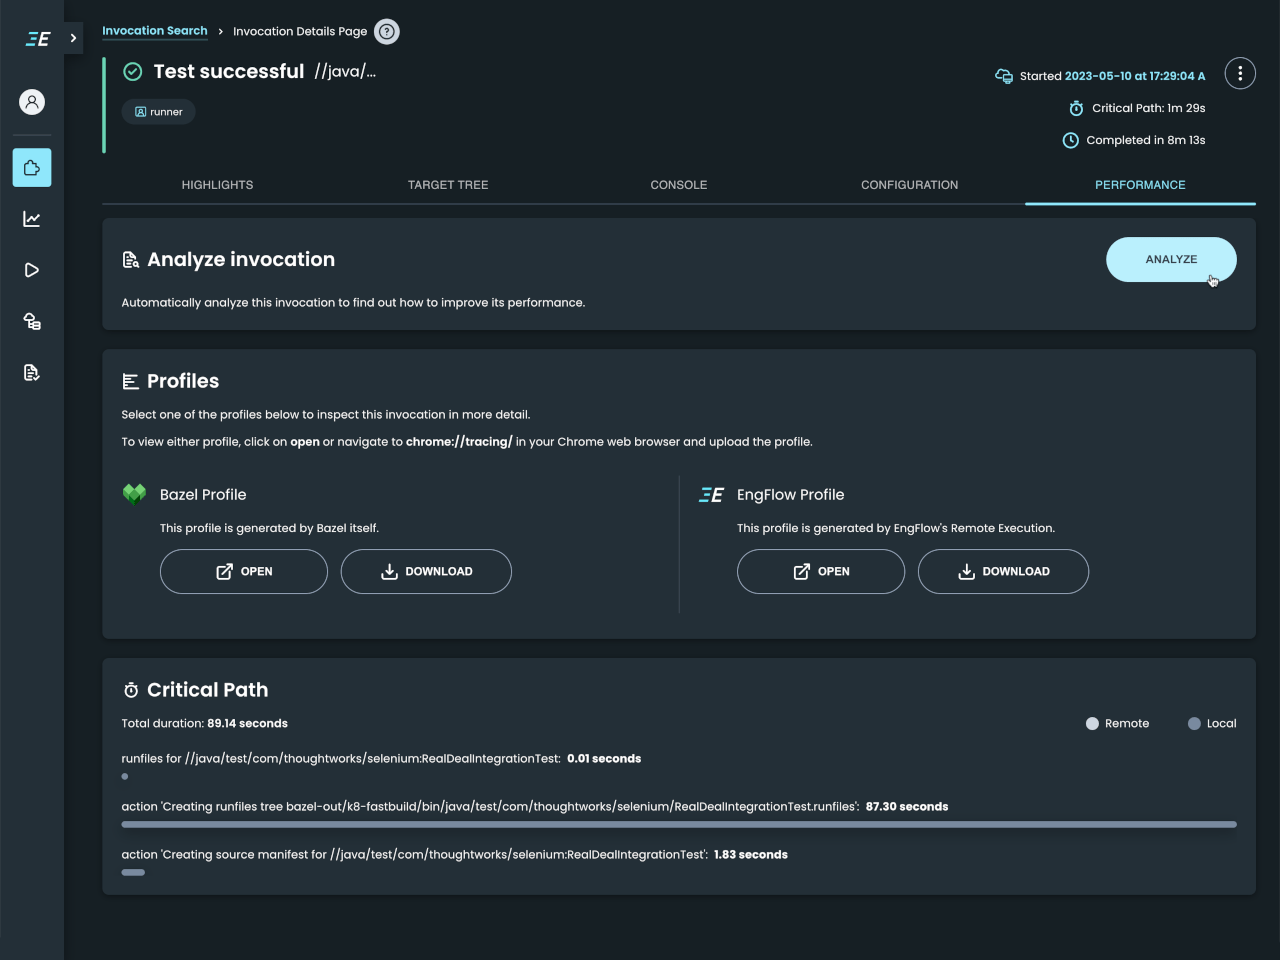 Build and Test UI: Performance for an invocation (dark mode)